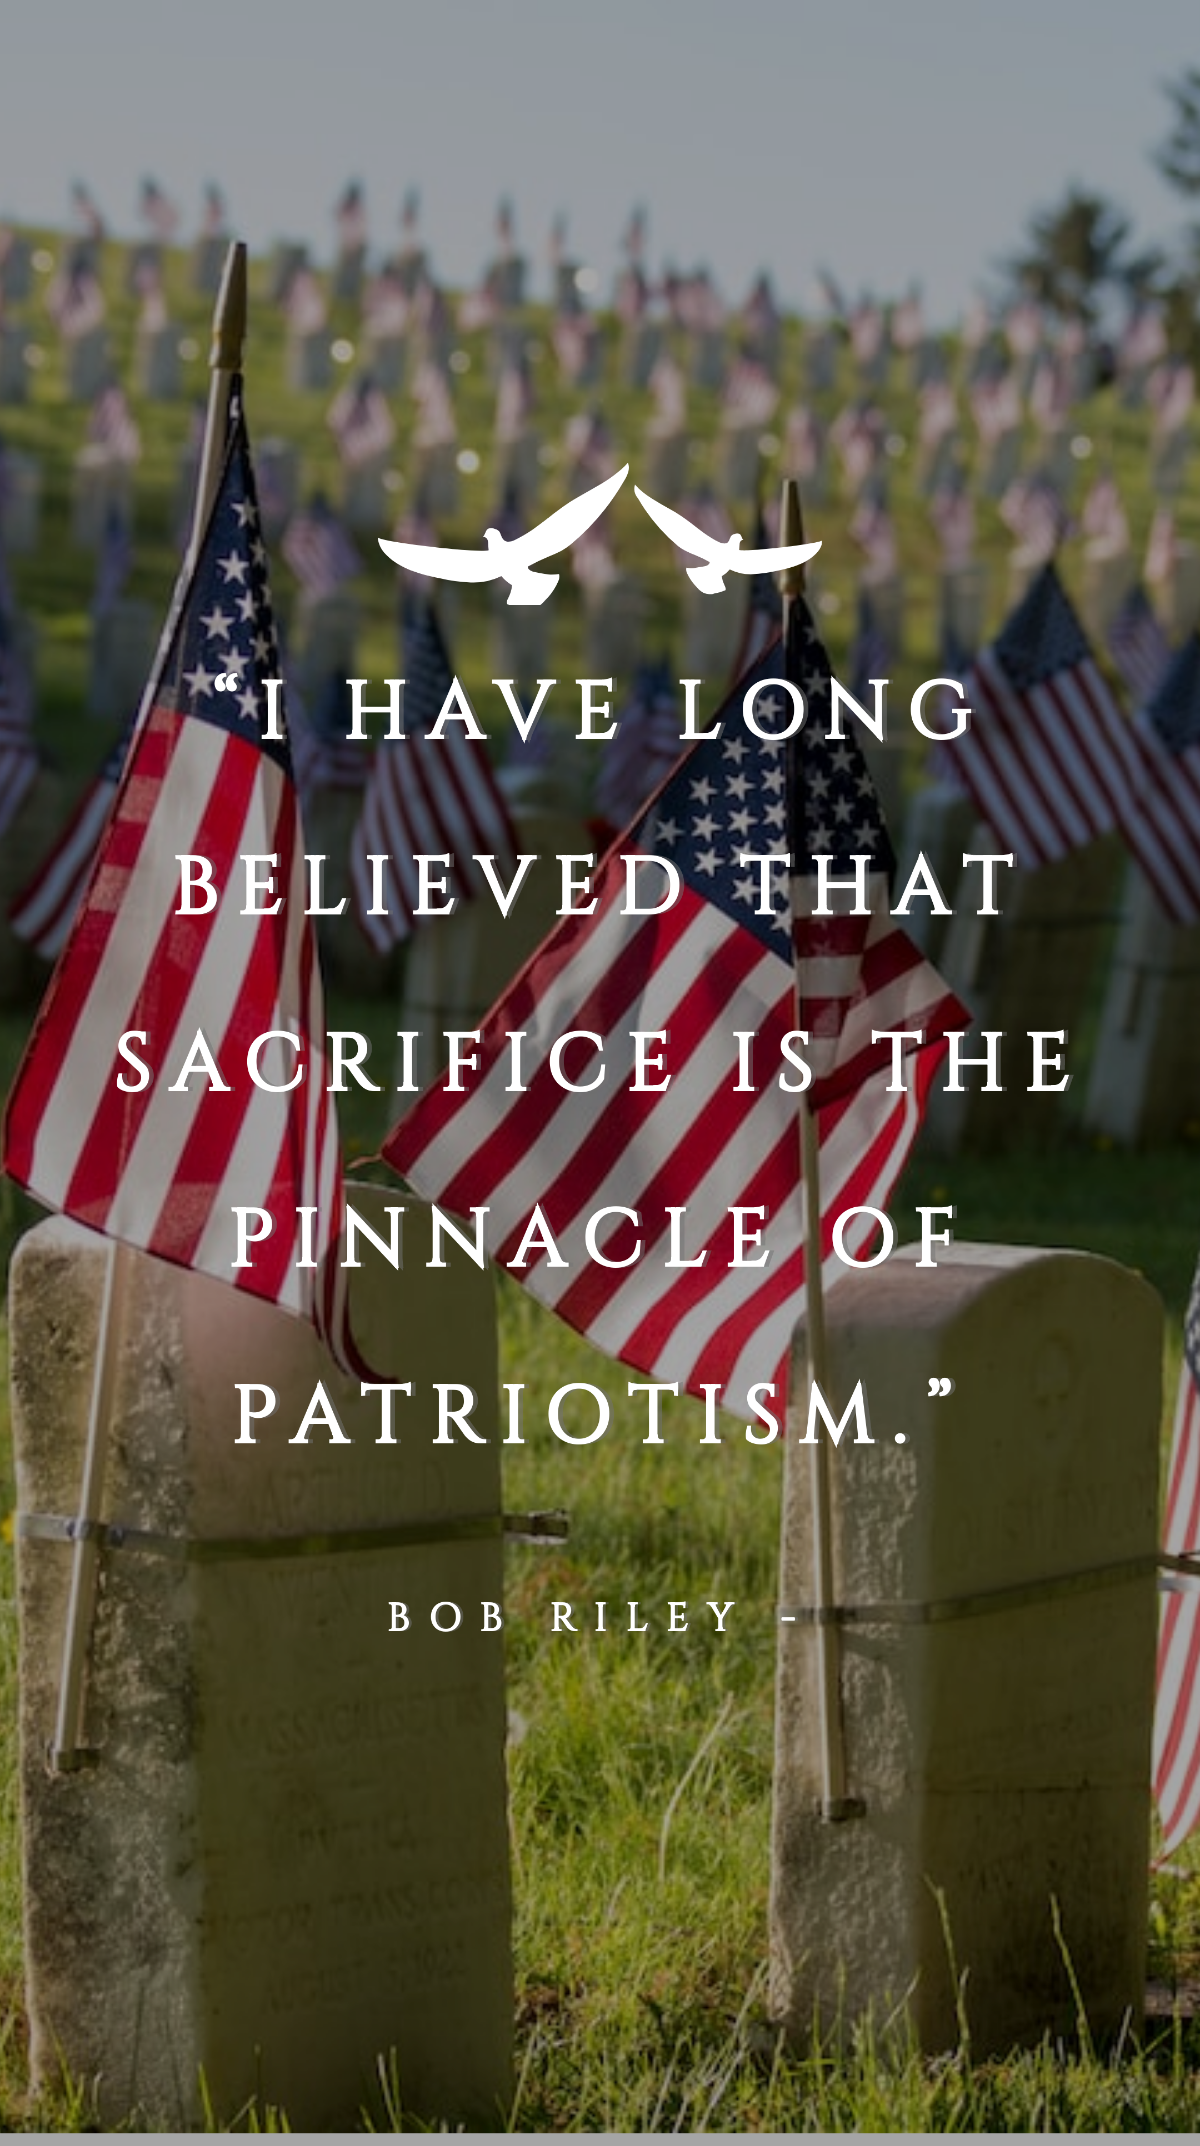 Bob Riley - “I have long believed that sacrifice is the pinnacle of patriotism.” Template